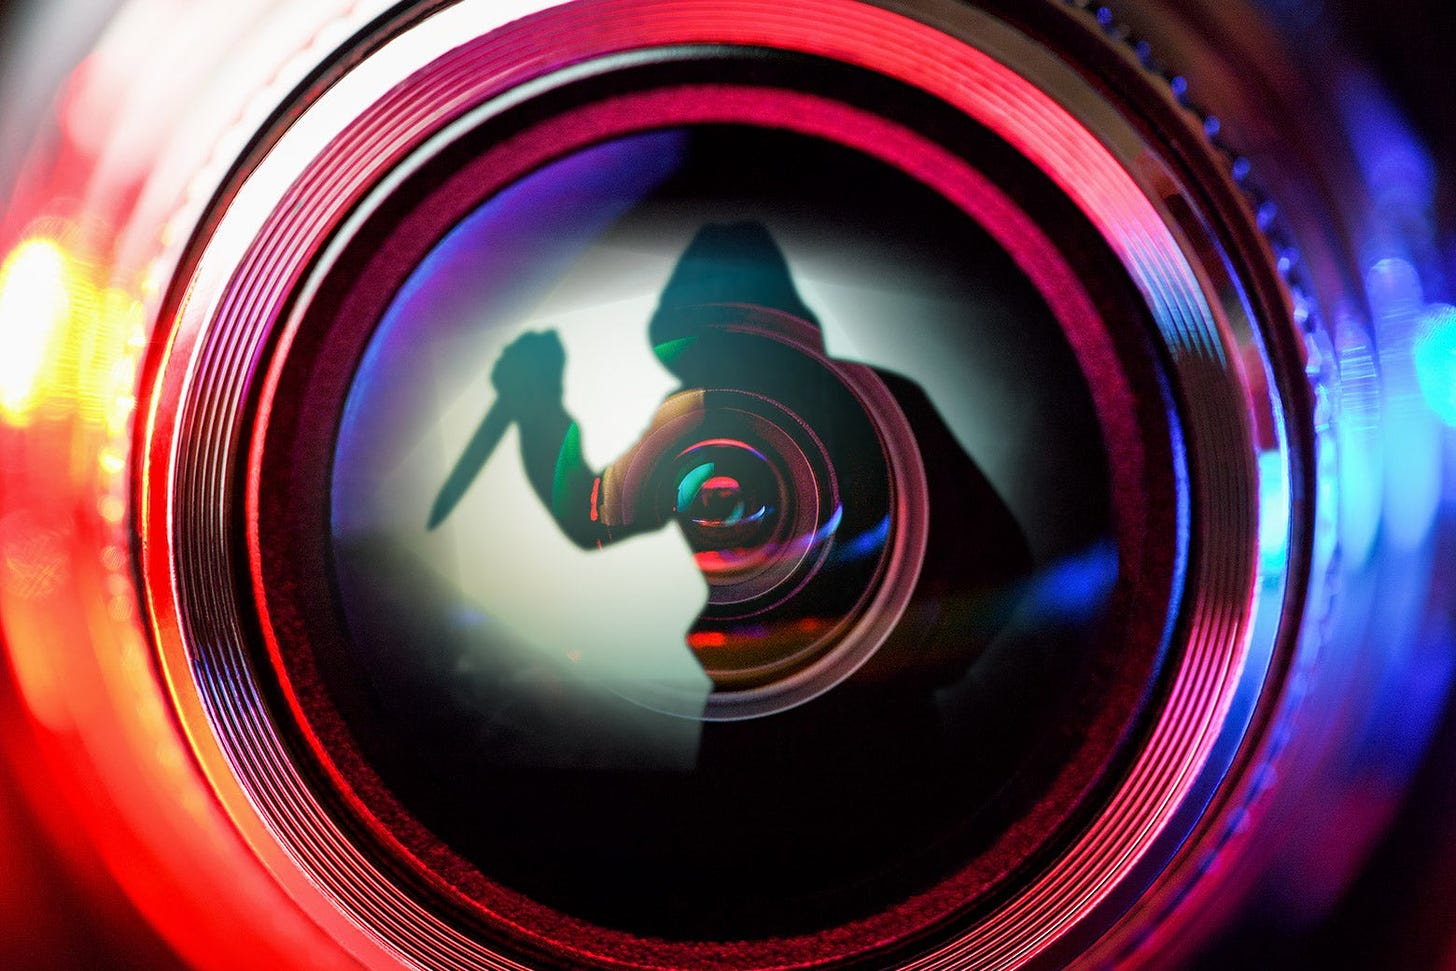 A stylized shot of a security camera lens, which contains a silhouette holding a knife menacingly.